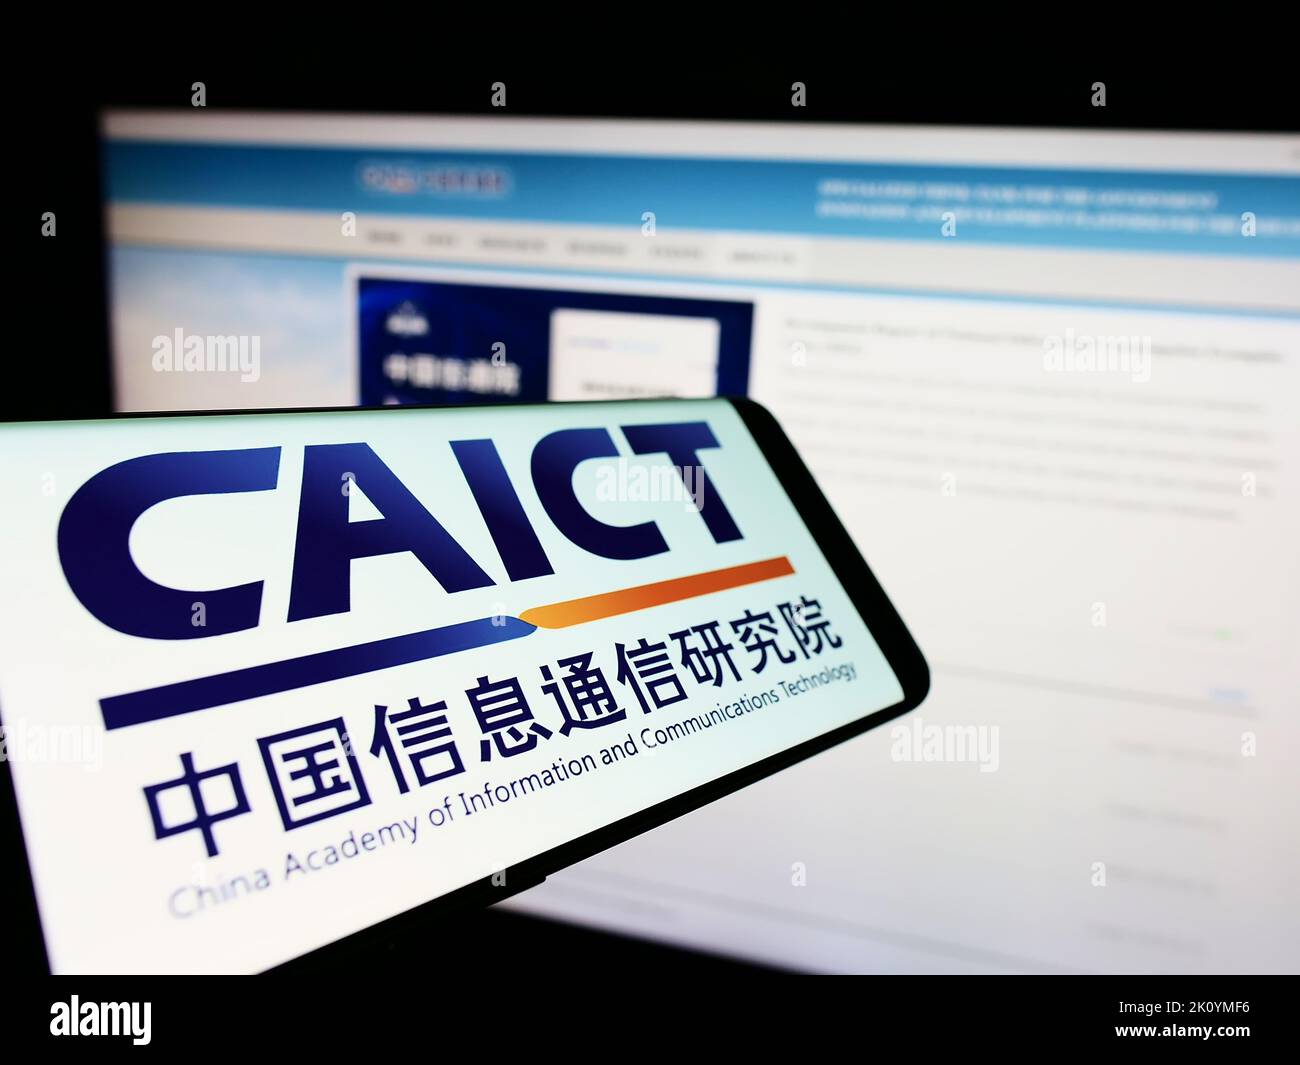 Smartphone with logo of Chinese communications research institute CAICT on screen in front of website. Focus on center of phone display. Stock Photo